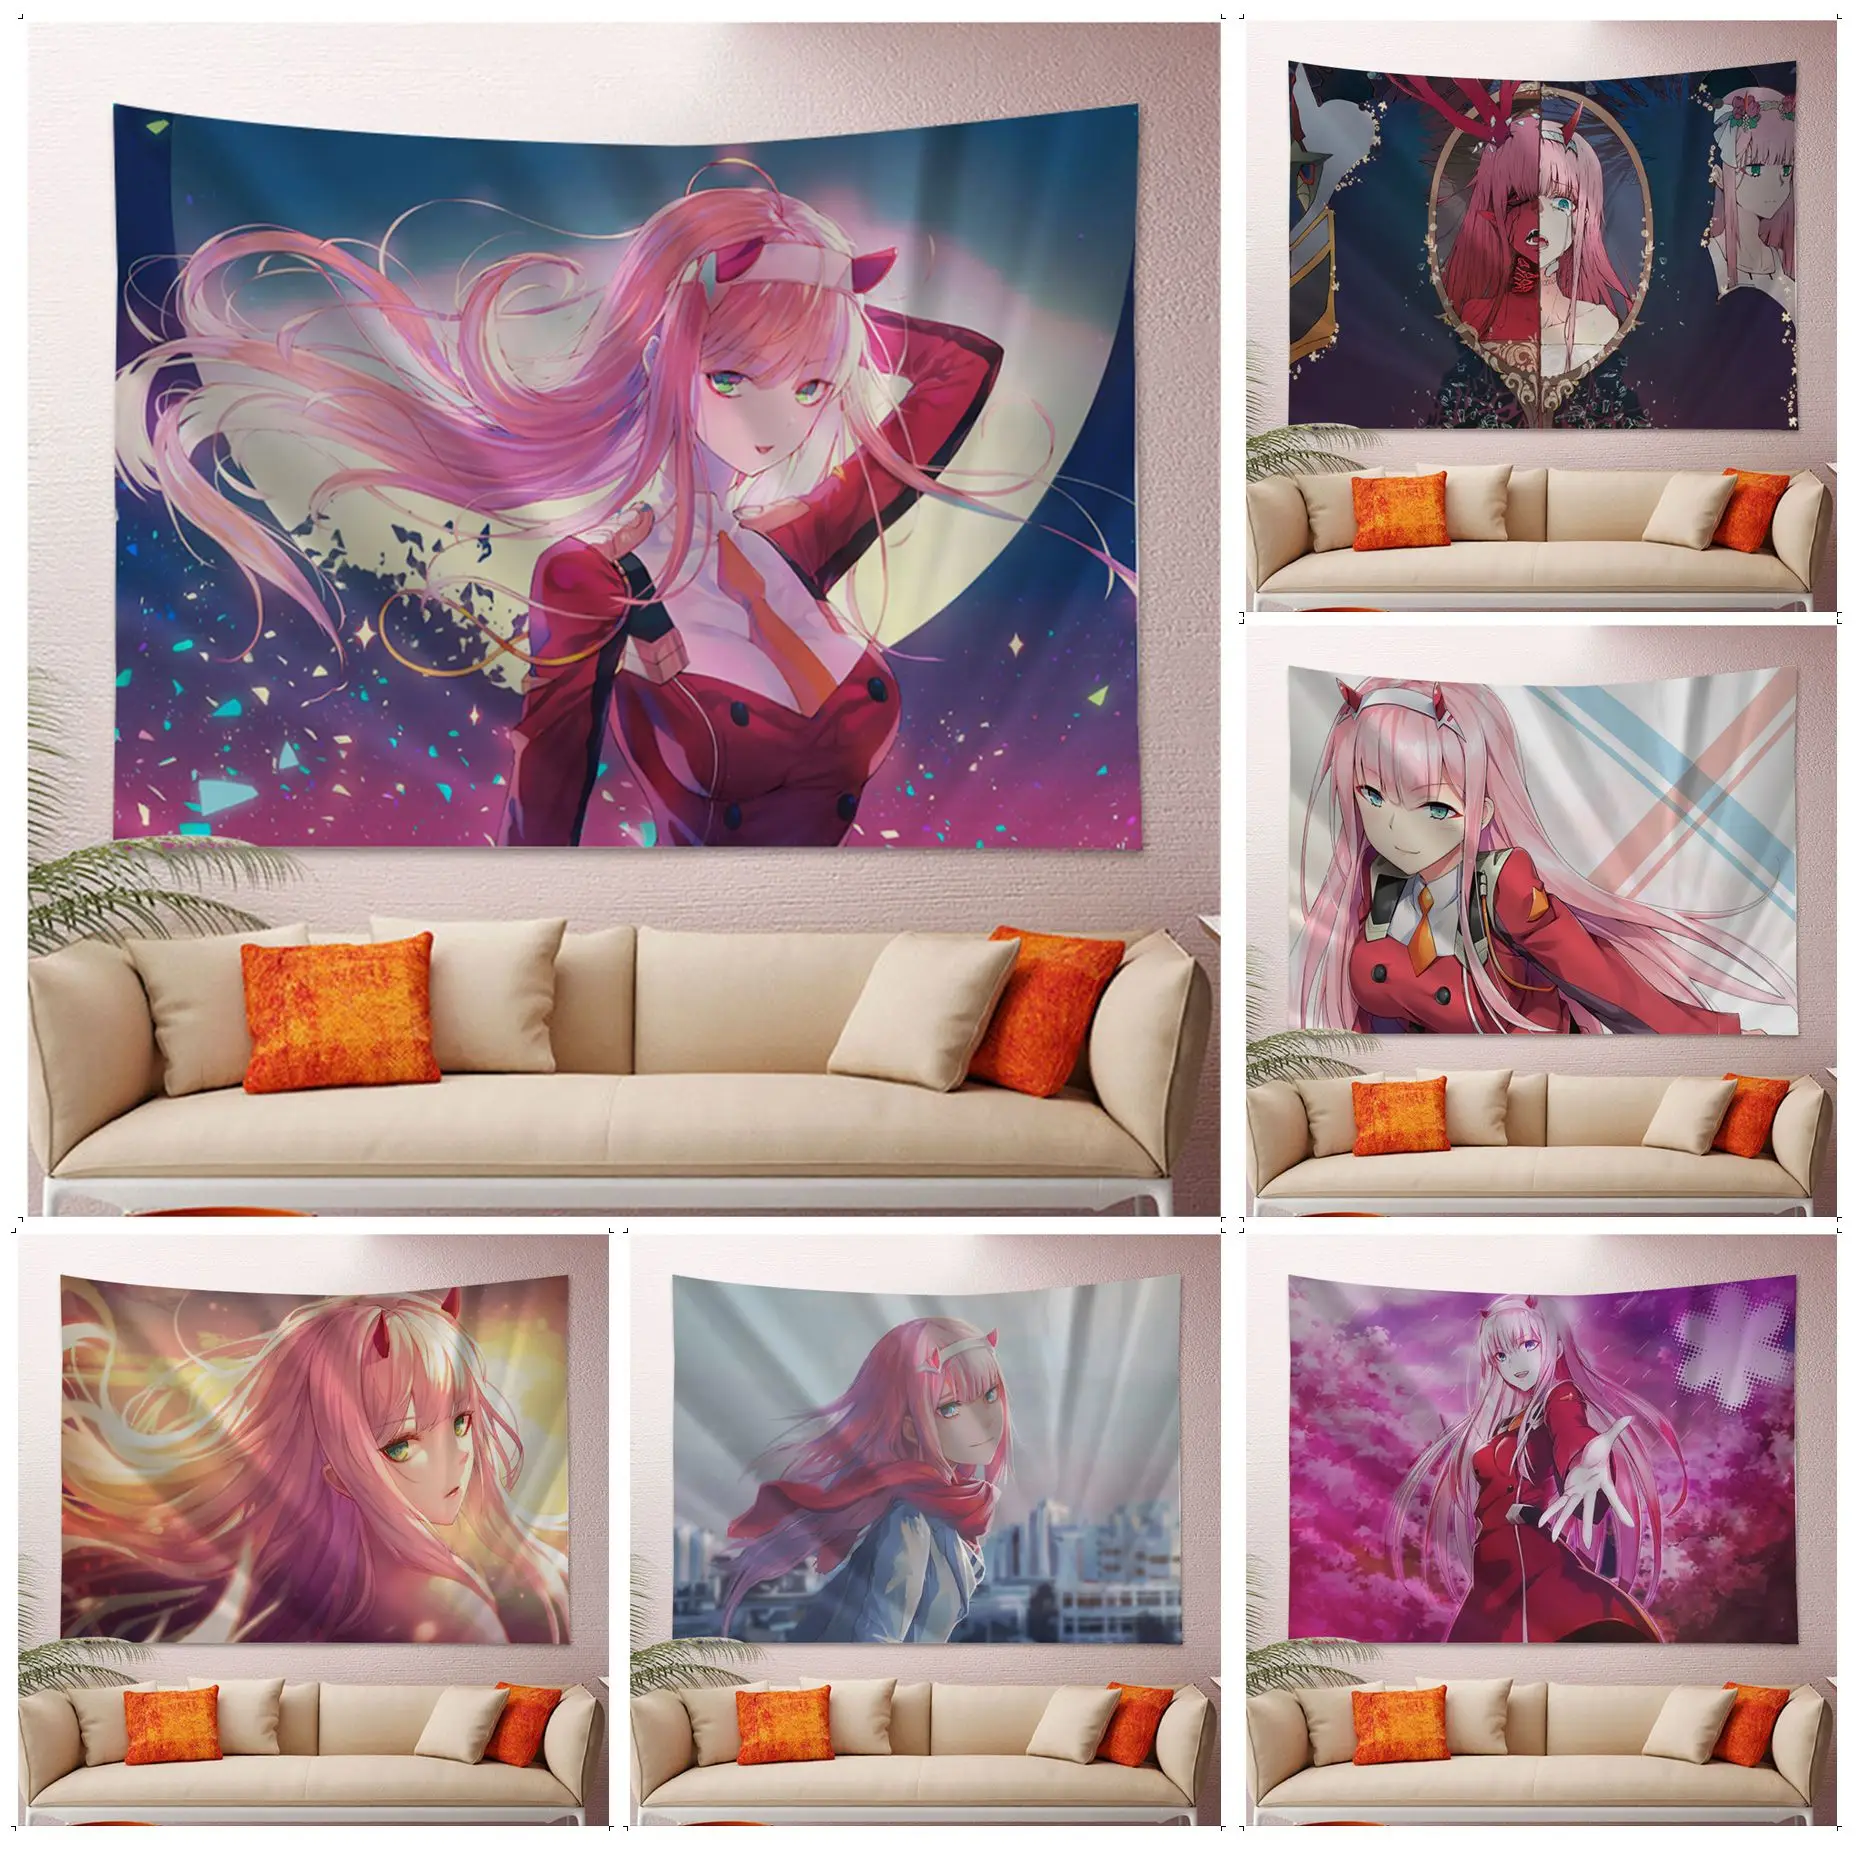 

Darling in the FranXX Zero Two Tapestry Tapestry Art Printing Indian Buddha Wall Decoration Witchcraft Bohemian Hippie Decor